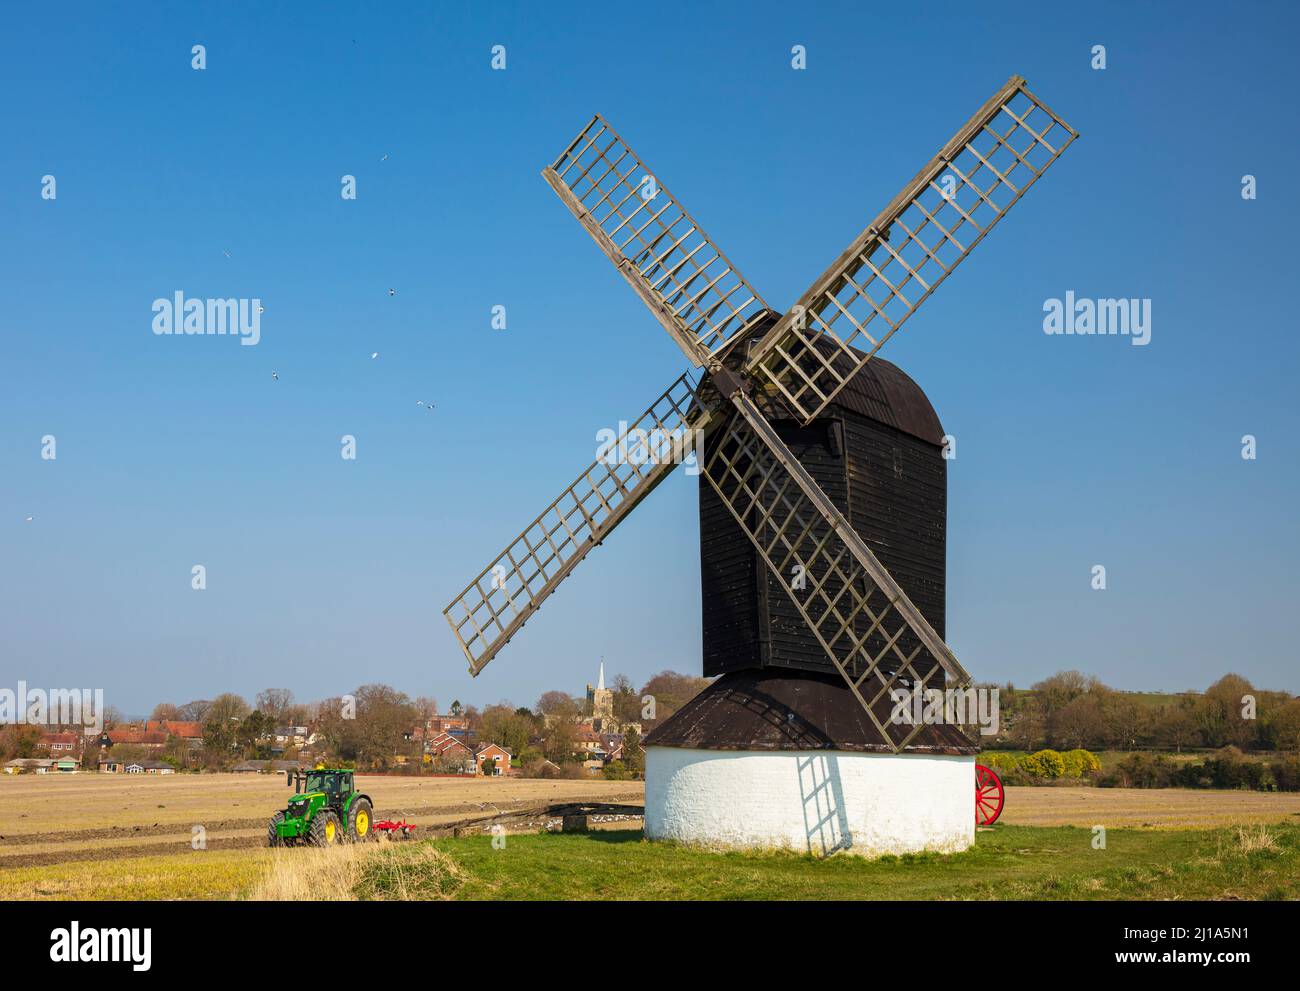 Pitstone Windmill, Ivinghoe, Pitstone, The Chilterns, Buckinghamshire, Angleterre, Royaume-Uni. Banque D'Images